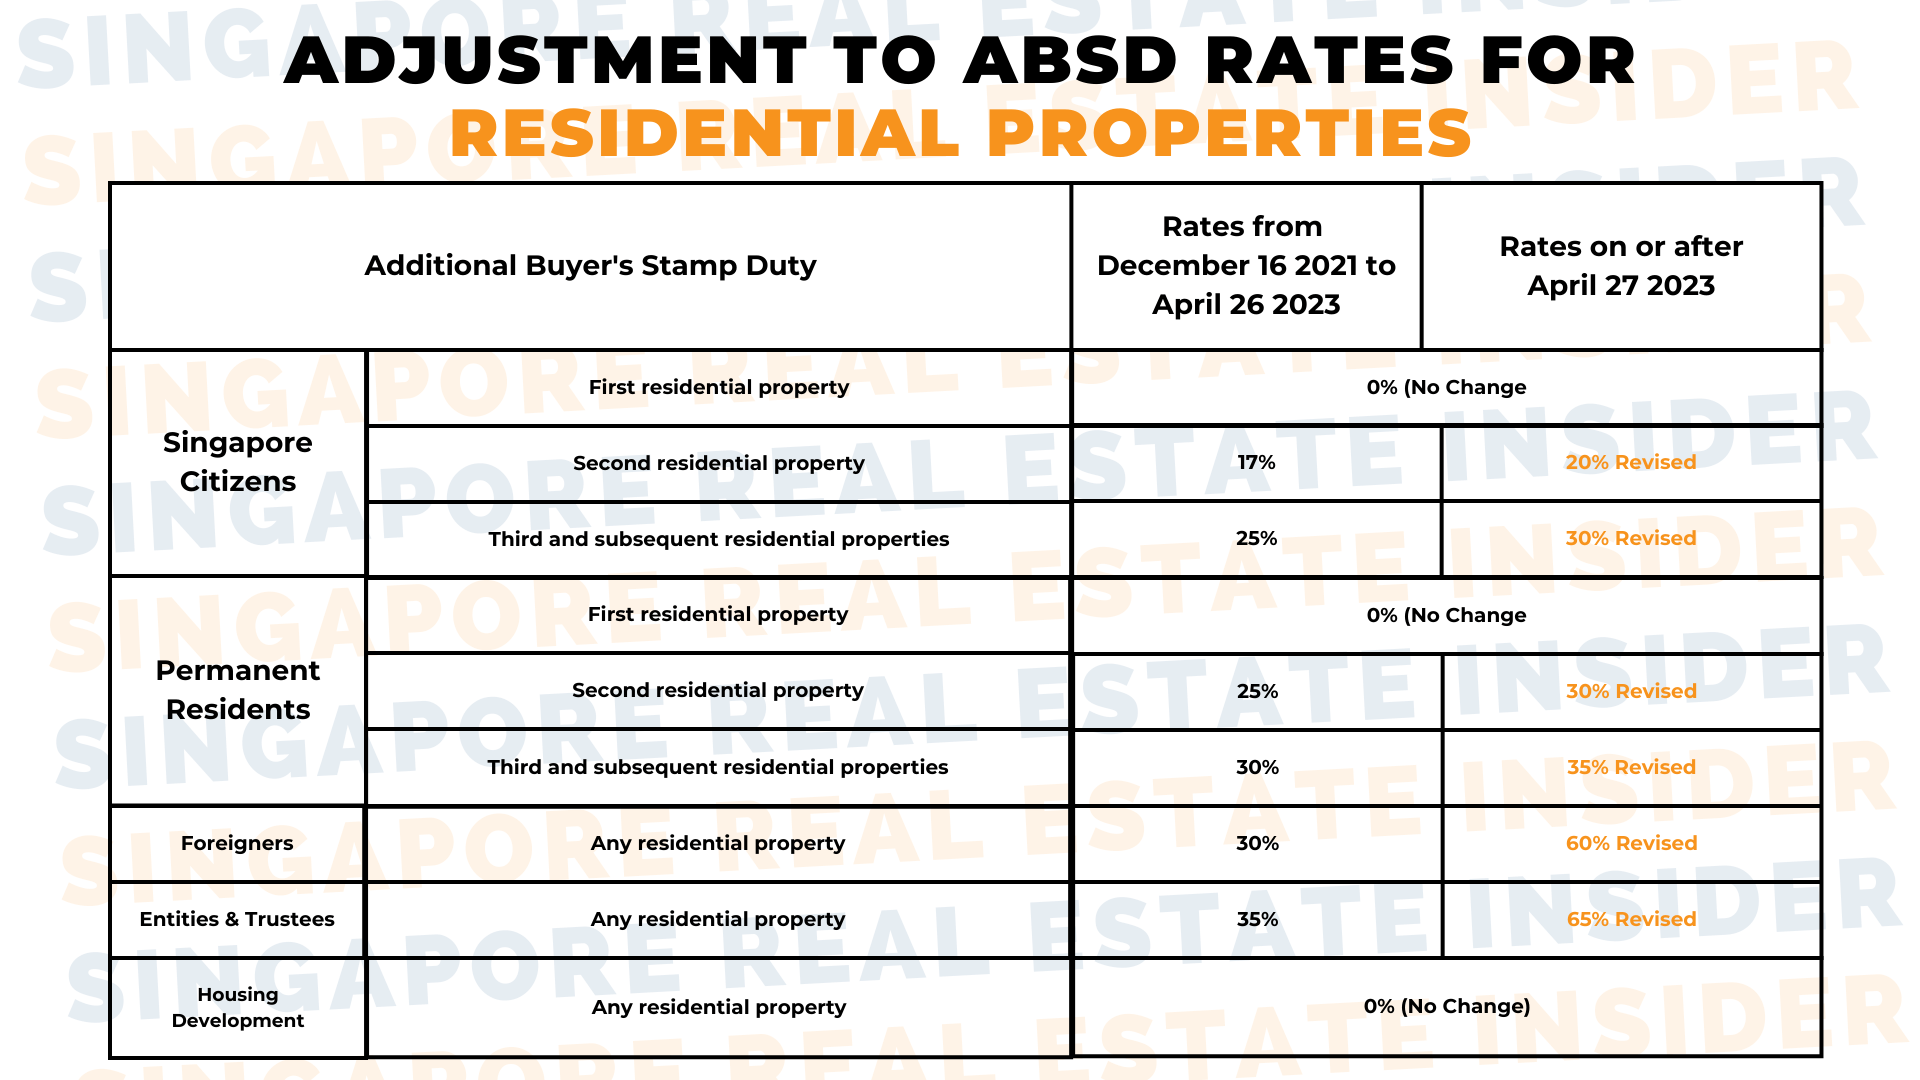 Adjustment to ABSD Rates - Residential